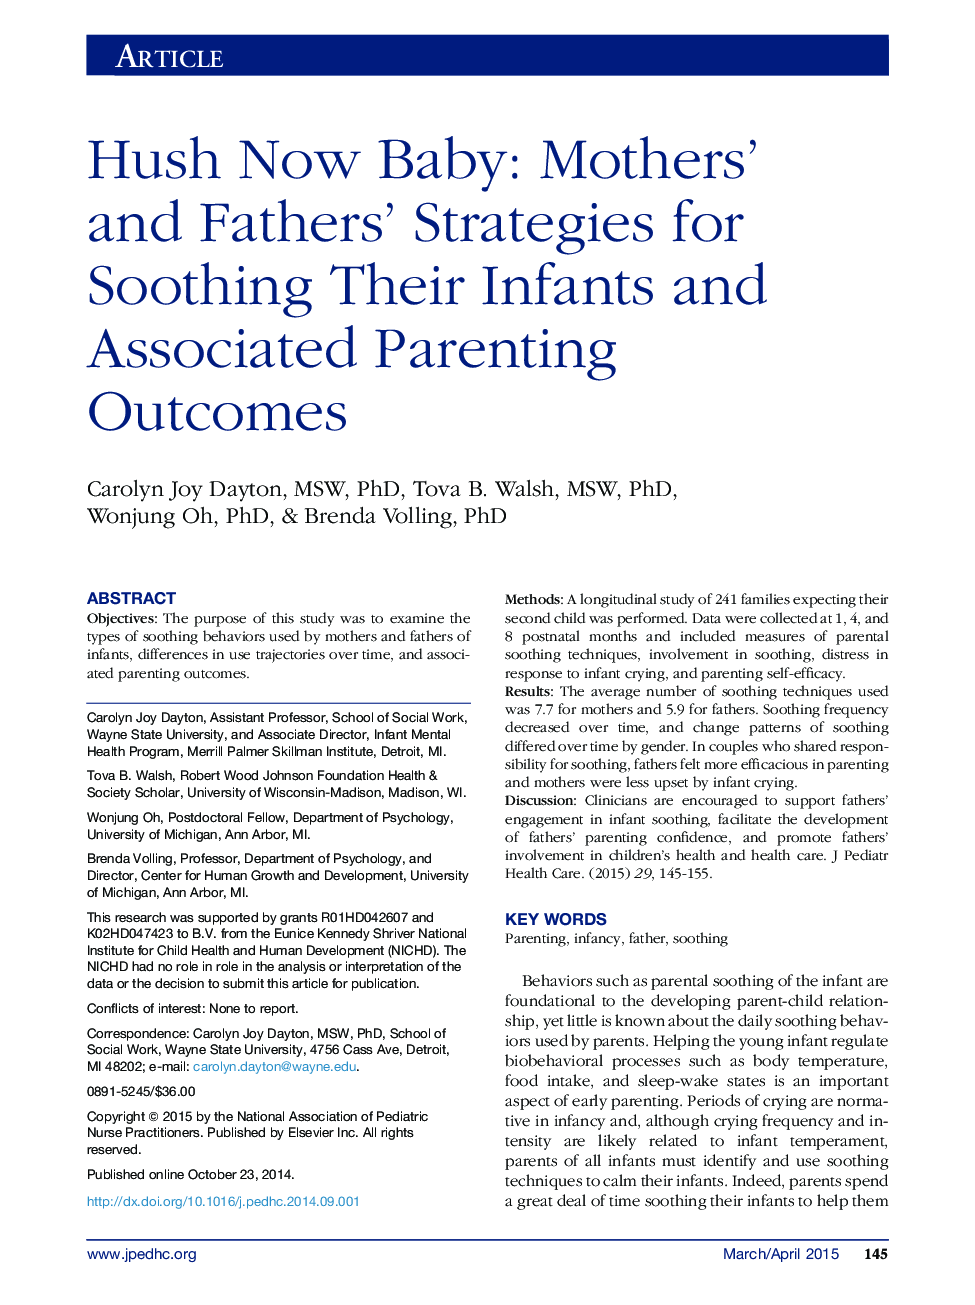 Hush Now Baby: Mothers' and Fathers' Strategies for Soothing Their Infants and Associated Parenting Outcomes 